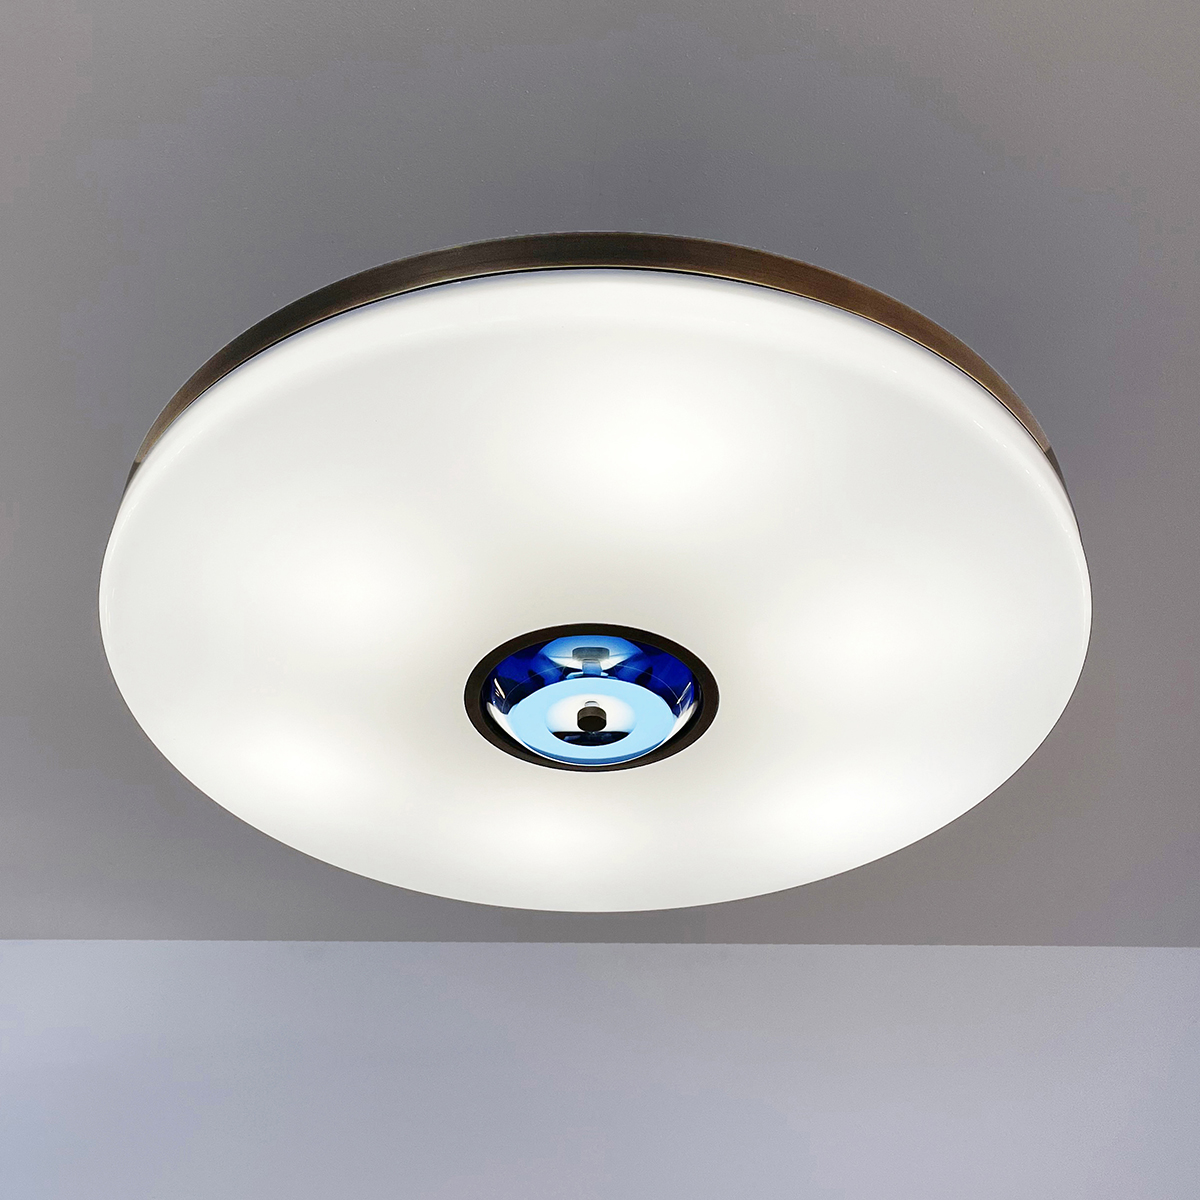 Saturno Ceiling Light by form A, gaspare asaro